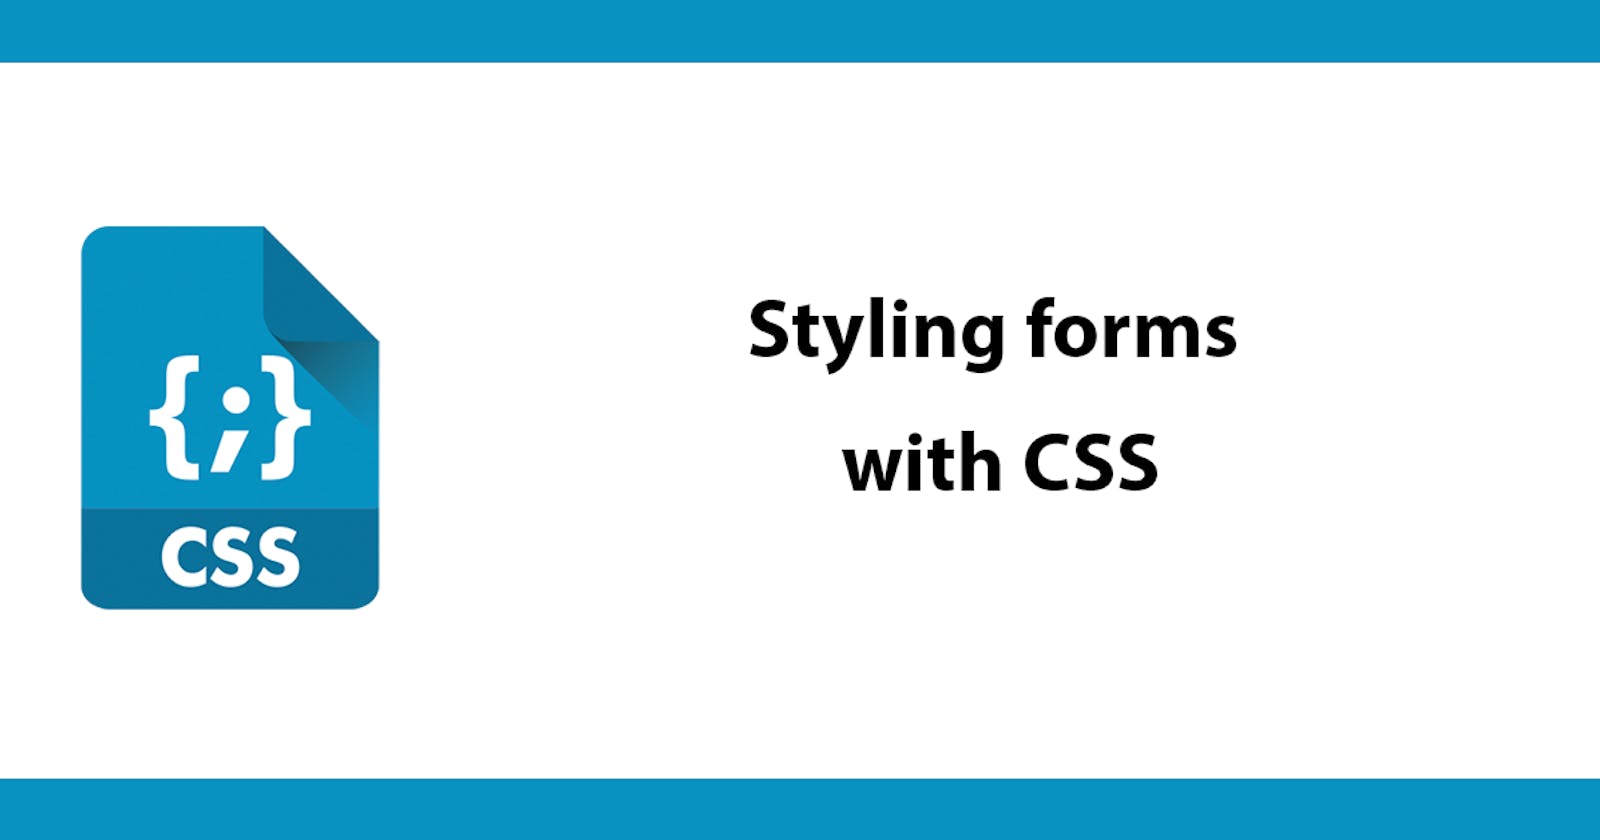 Styling forms with CSS